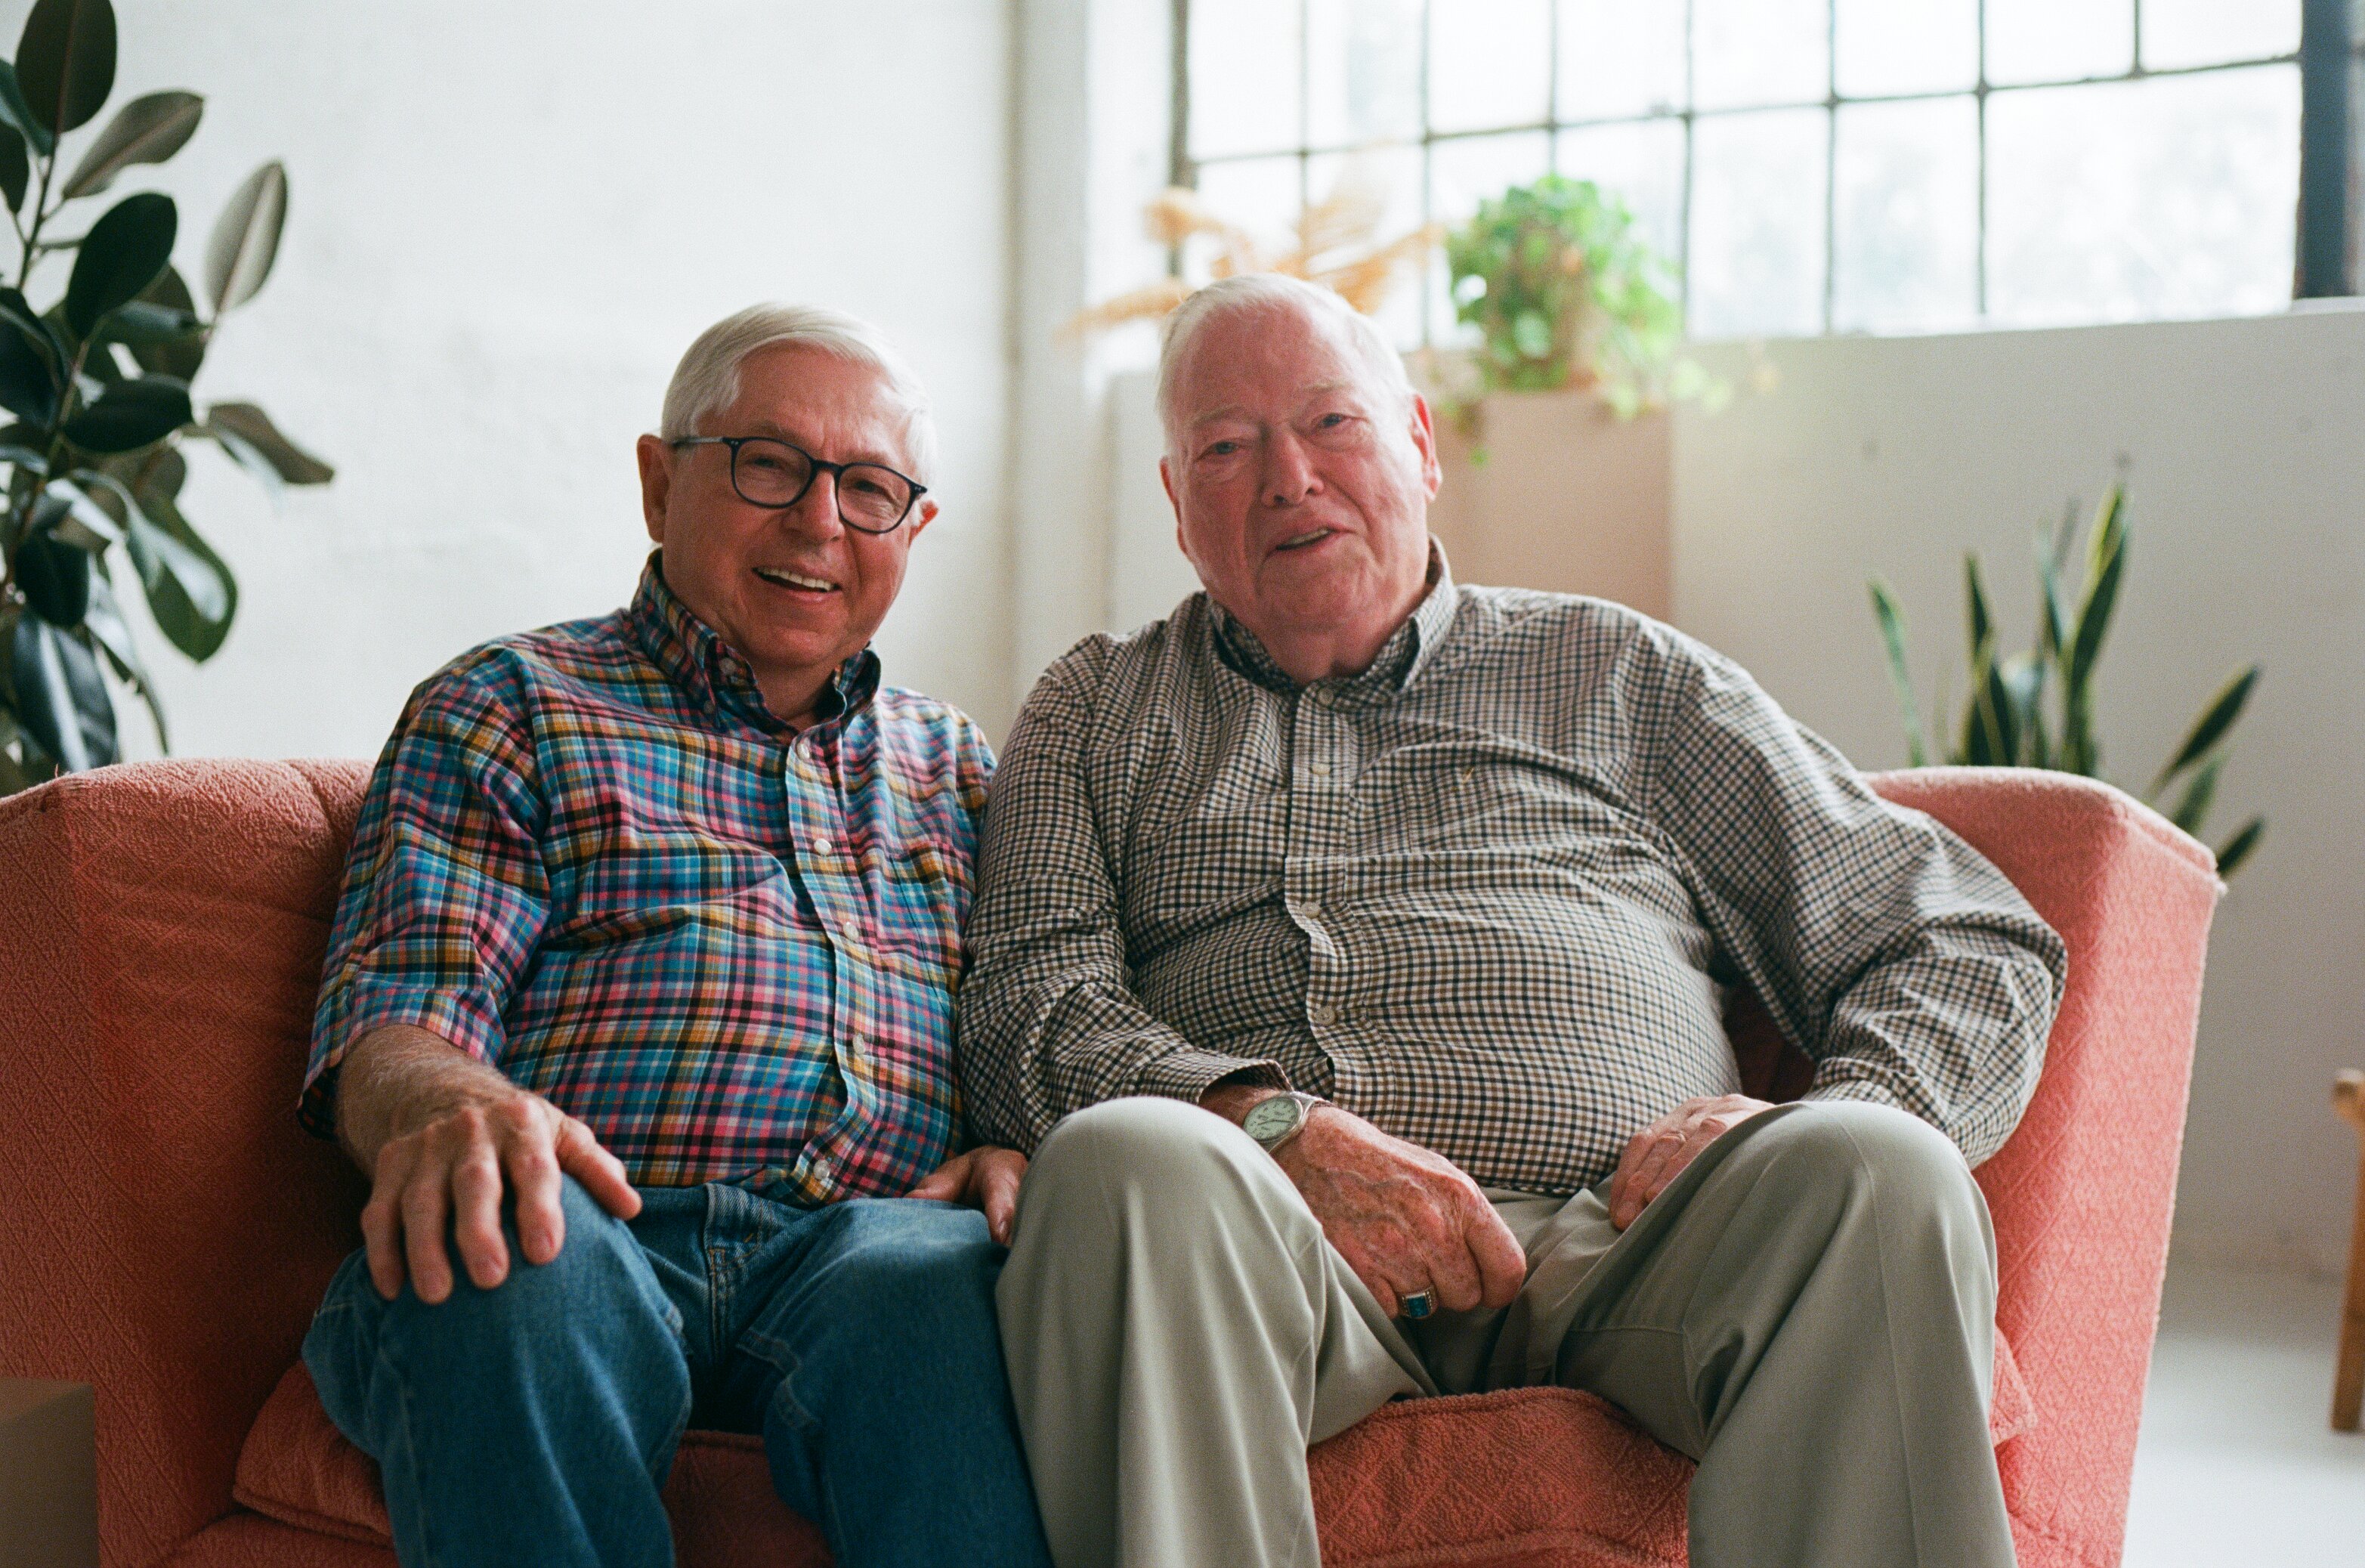 Bill Bartlett, a resident at one of the City of Toronto's Long-Term Care Homes, and his partner Walter